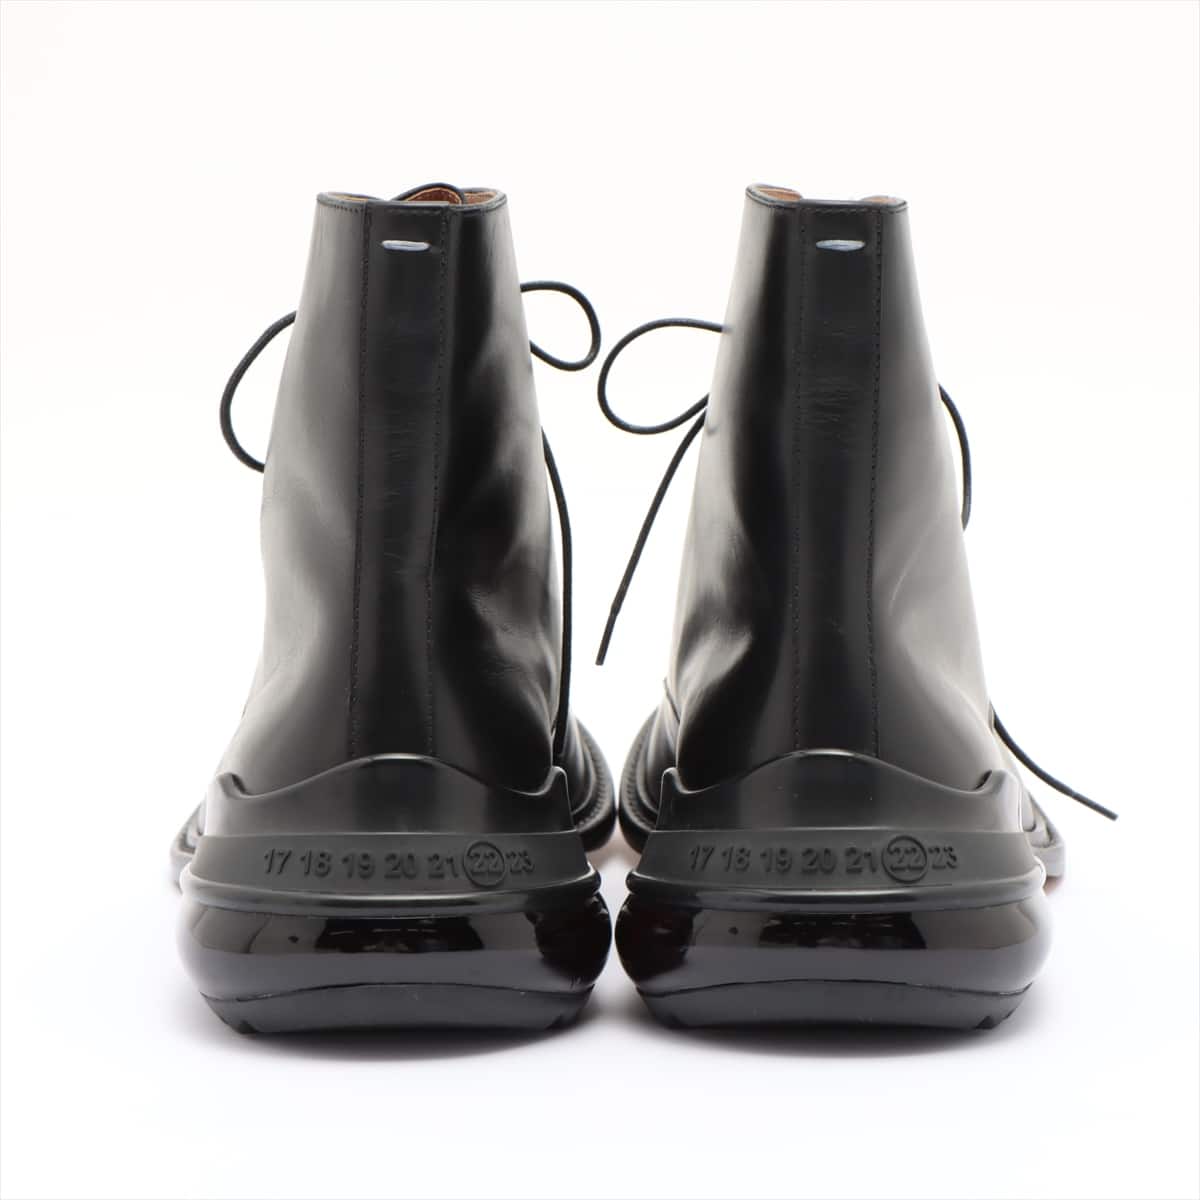 Maison Margiela 20AW Leather Boots 43 Men's Black airbags ?